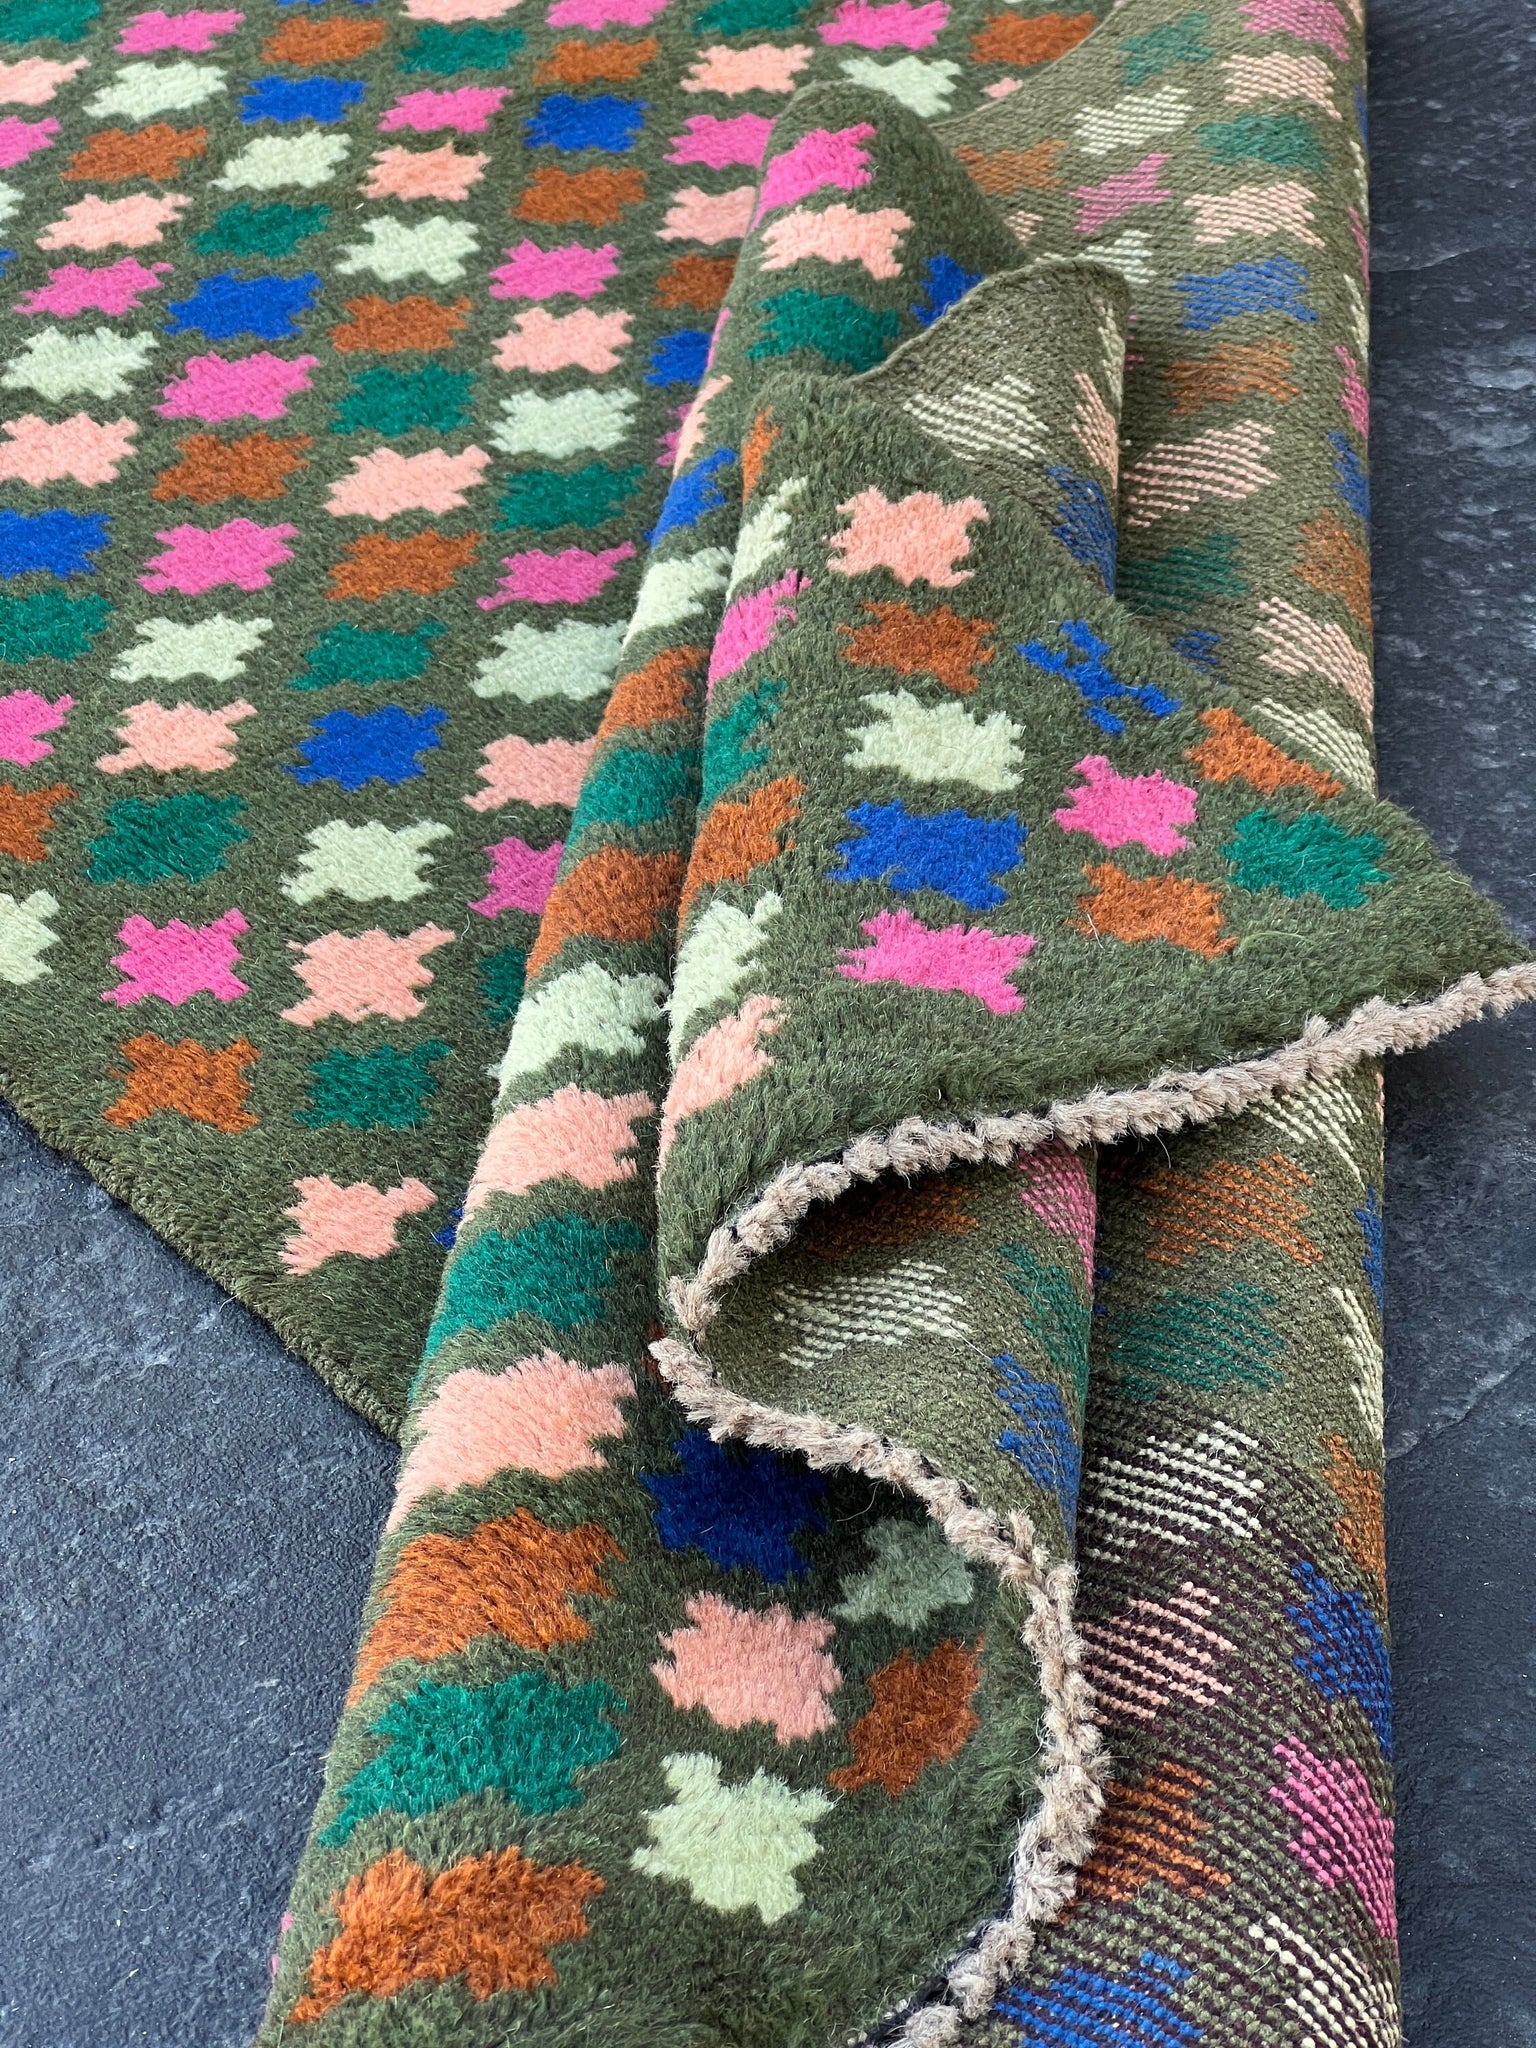 3x10 (90x305) Handmade Vintage Baluch Afghan Runner Rug | Olive Green Rose Pink Chocolate Brown Blush Pink Turquoise Blue Teal Hand Knotted